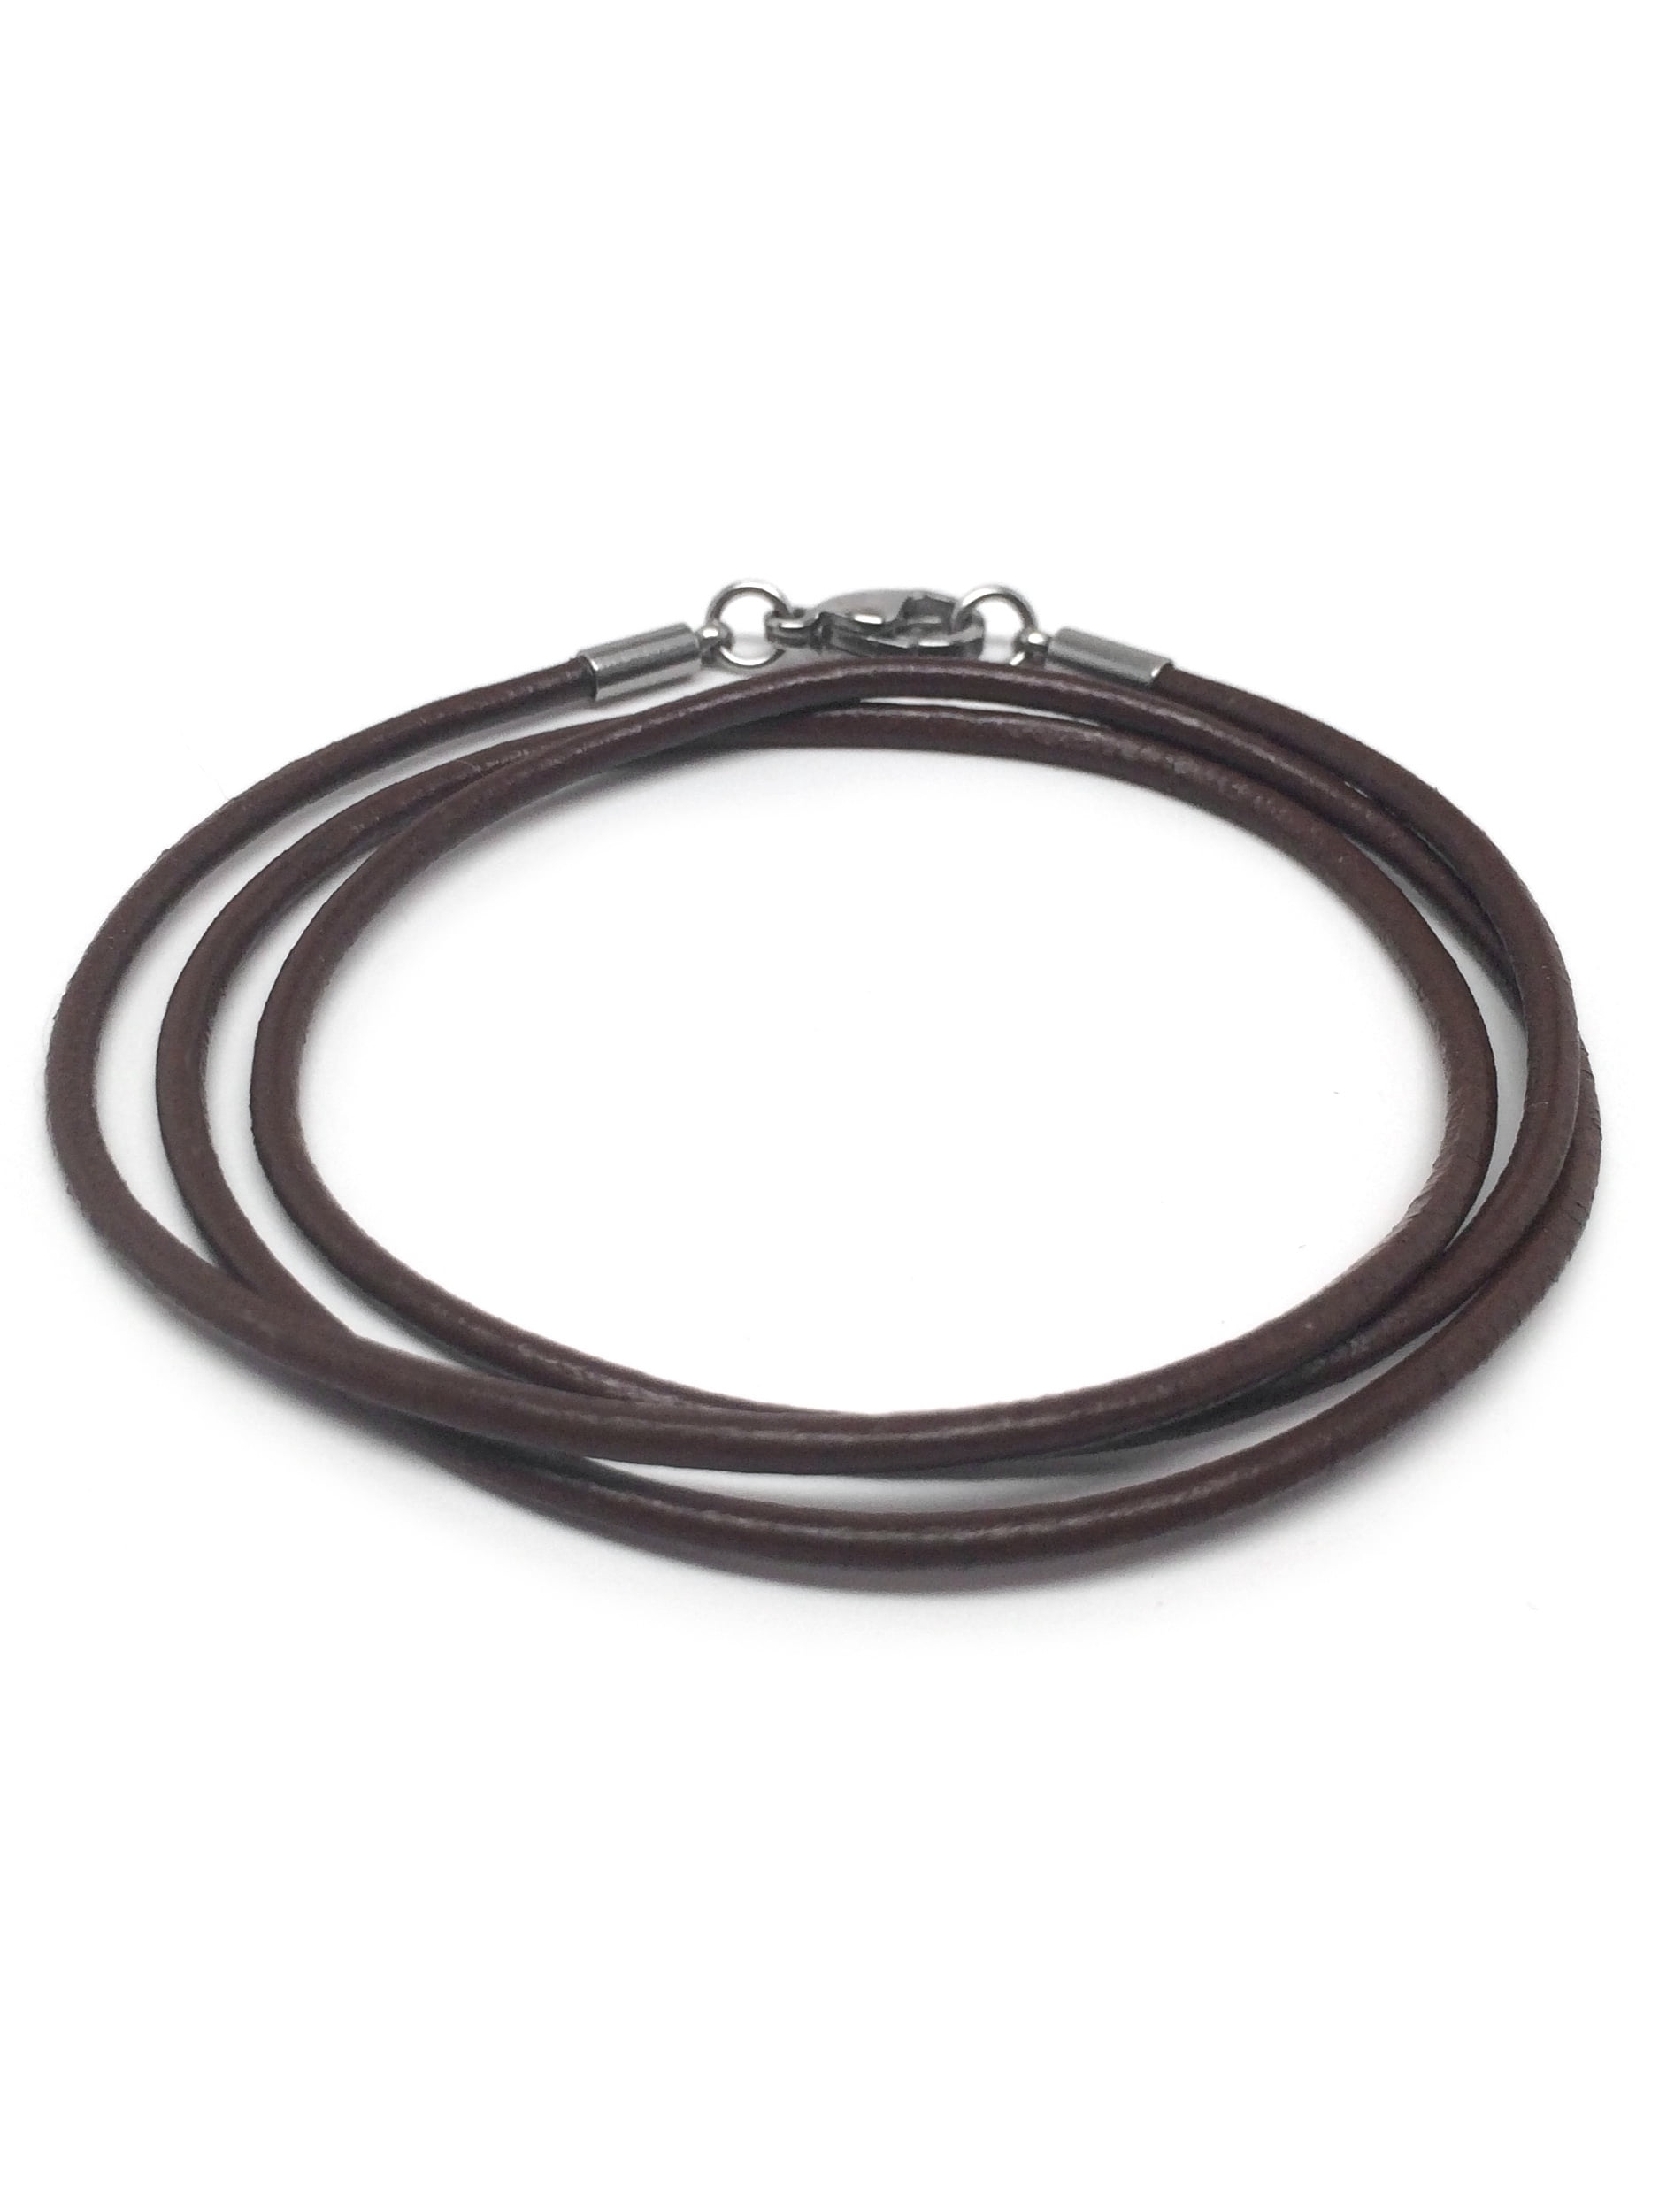 FaithHeart Braided Leather Cord Necklace for Men 2MM Black Woven